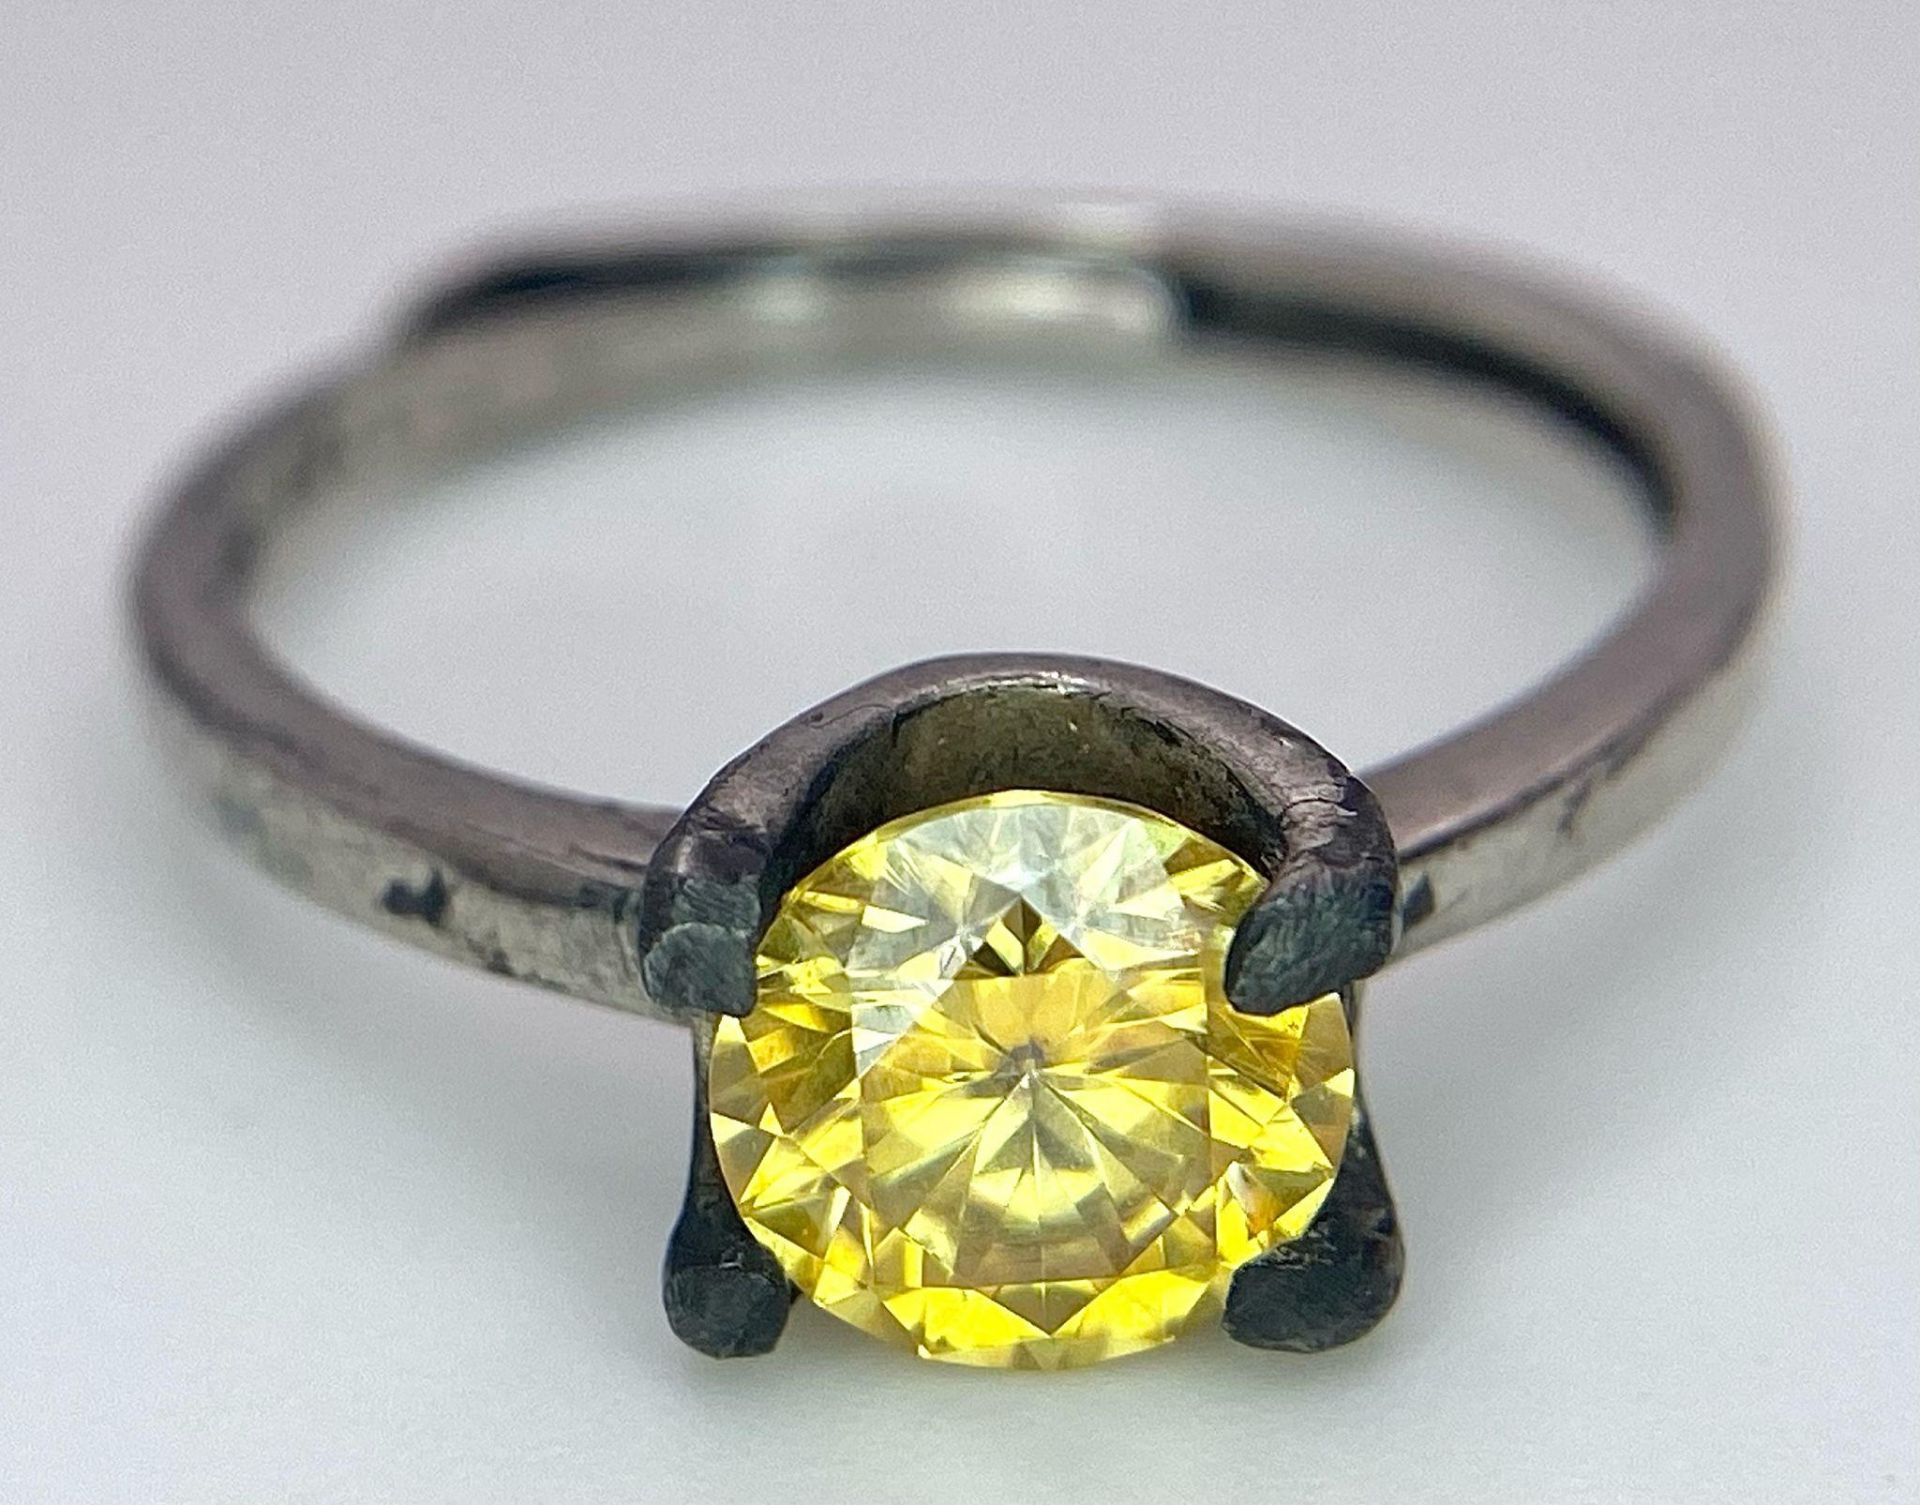 A 1ct Yellow Moissanite Solitaire Ring - Set in 925 Silver. Comes with a GRA certificate. Size L. - Bild 6 aus 13